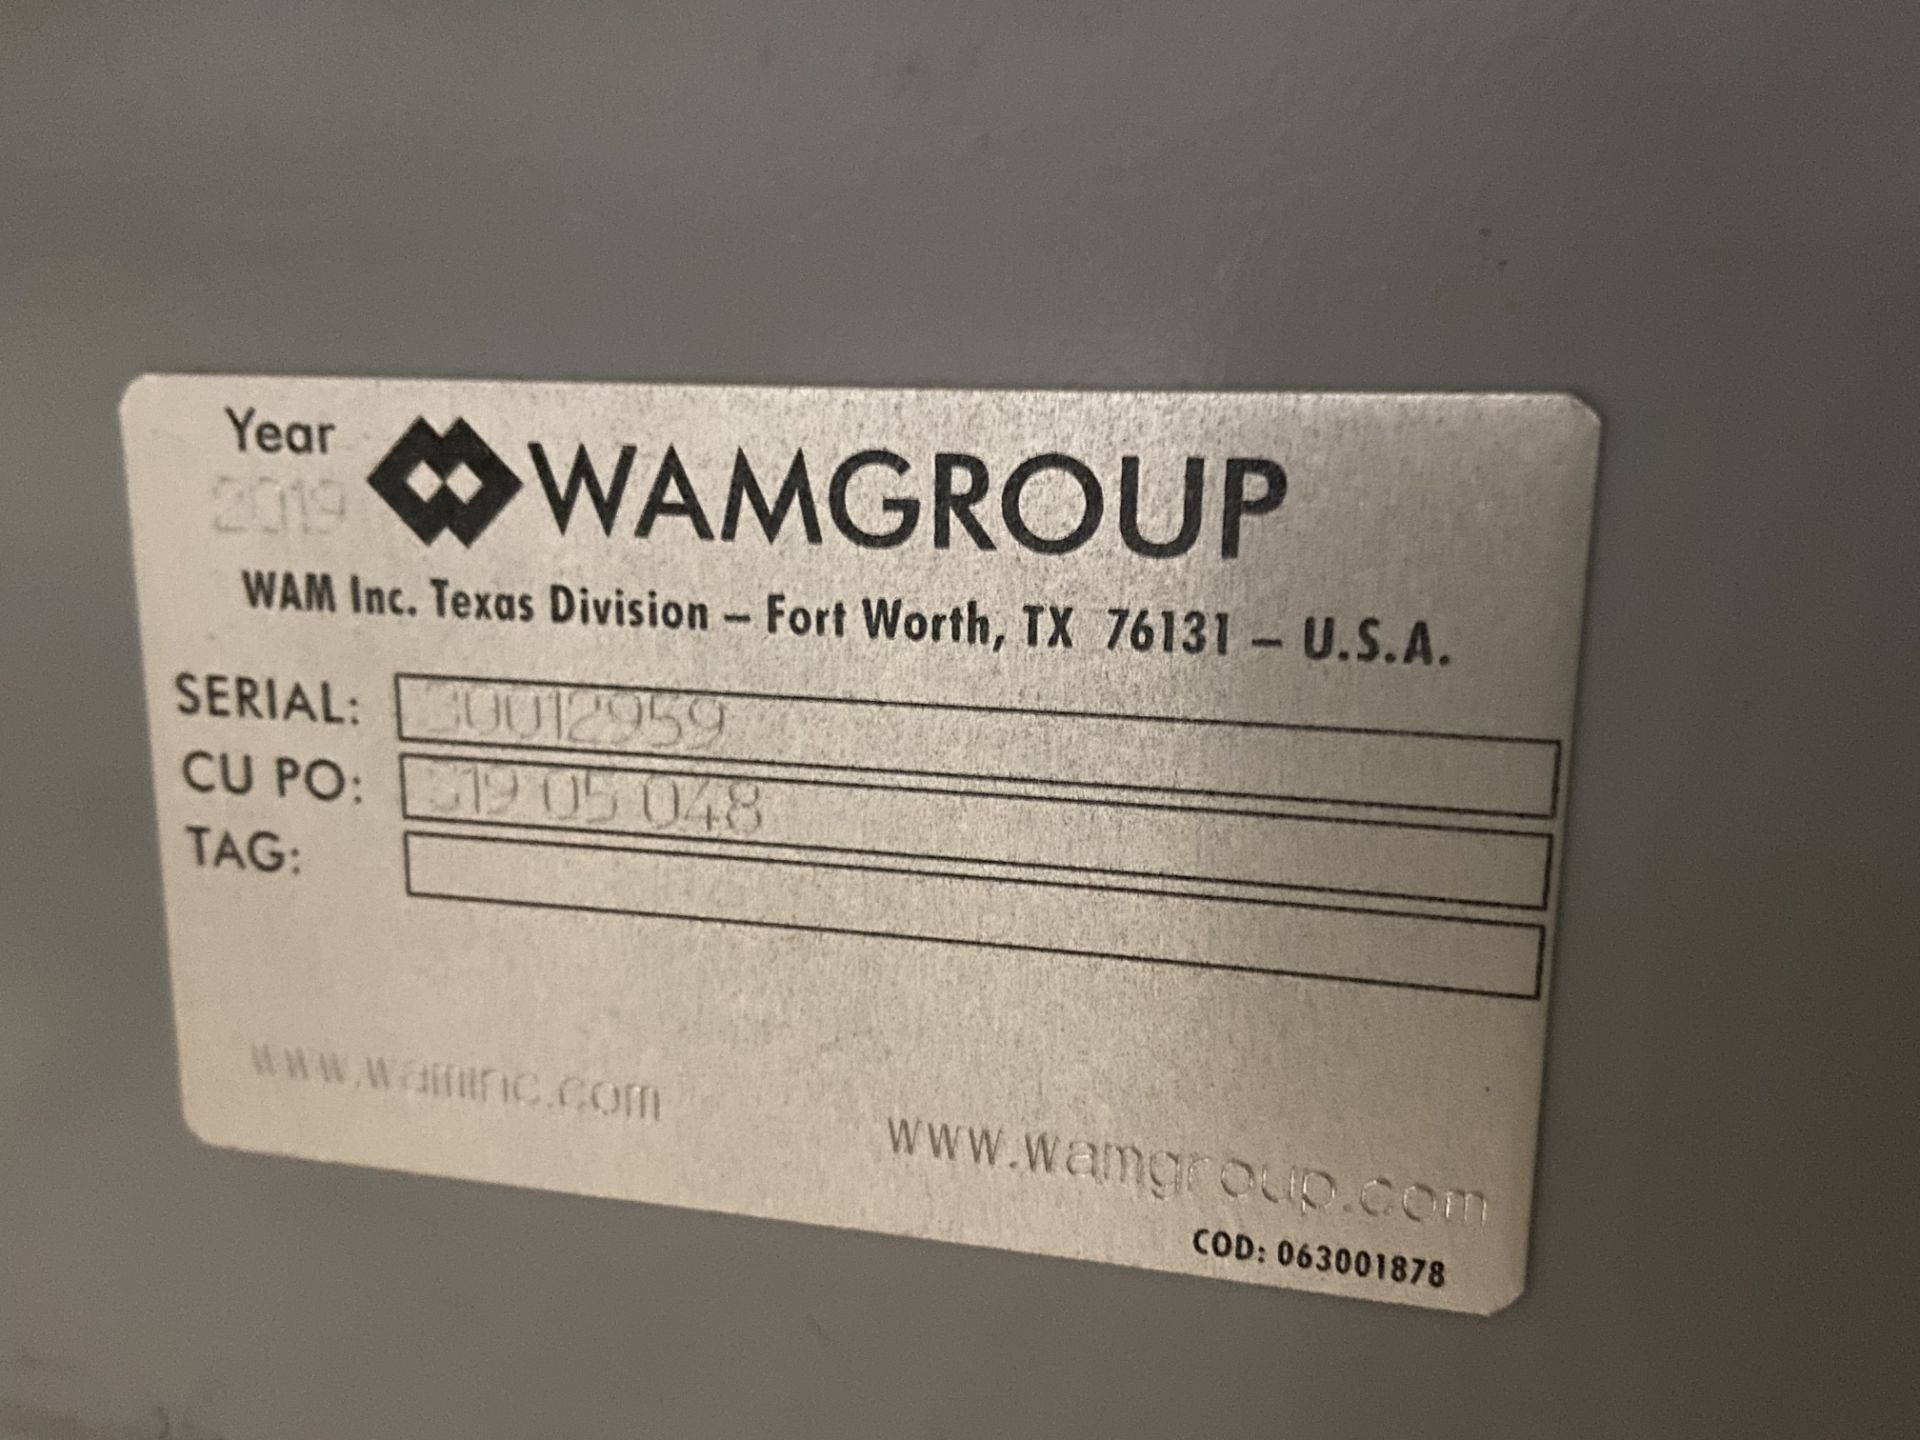 NEW Wamgroup Screw Auger, Serial# 30012959, CU PO# 31905048, Rigging/ Loading Fee: $75 - Image 3 of 6